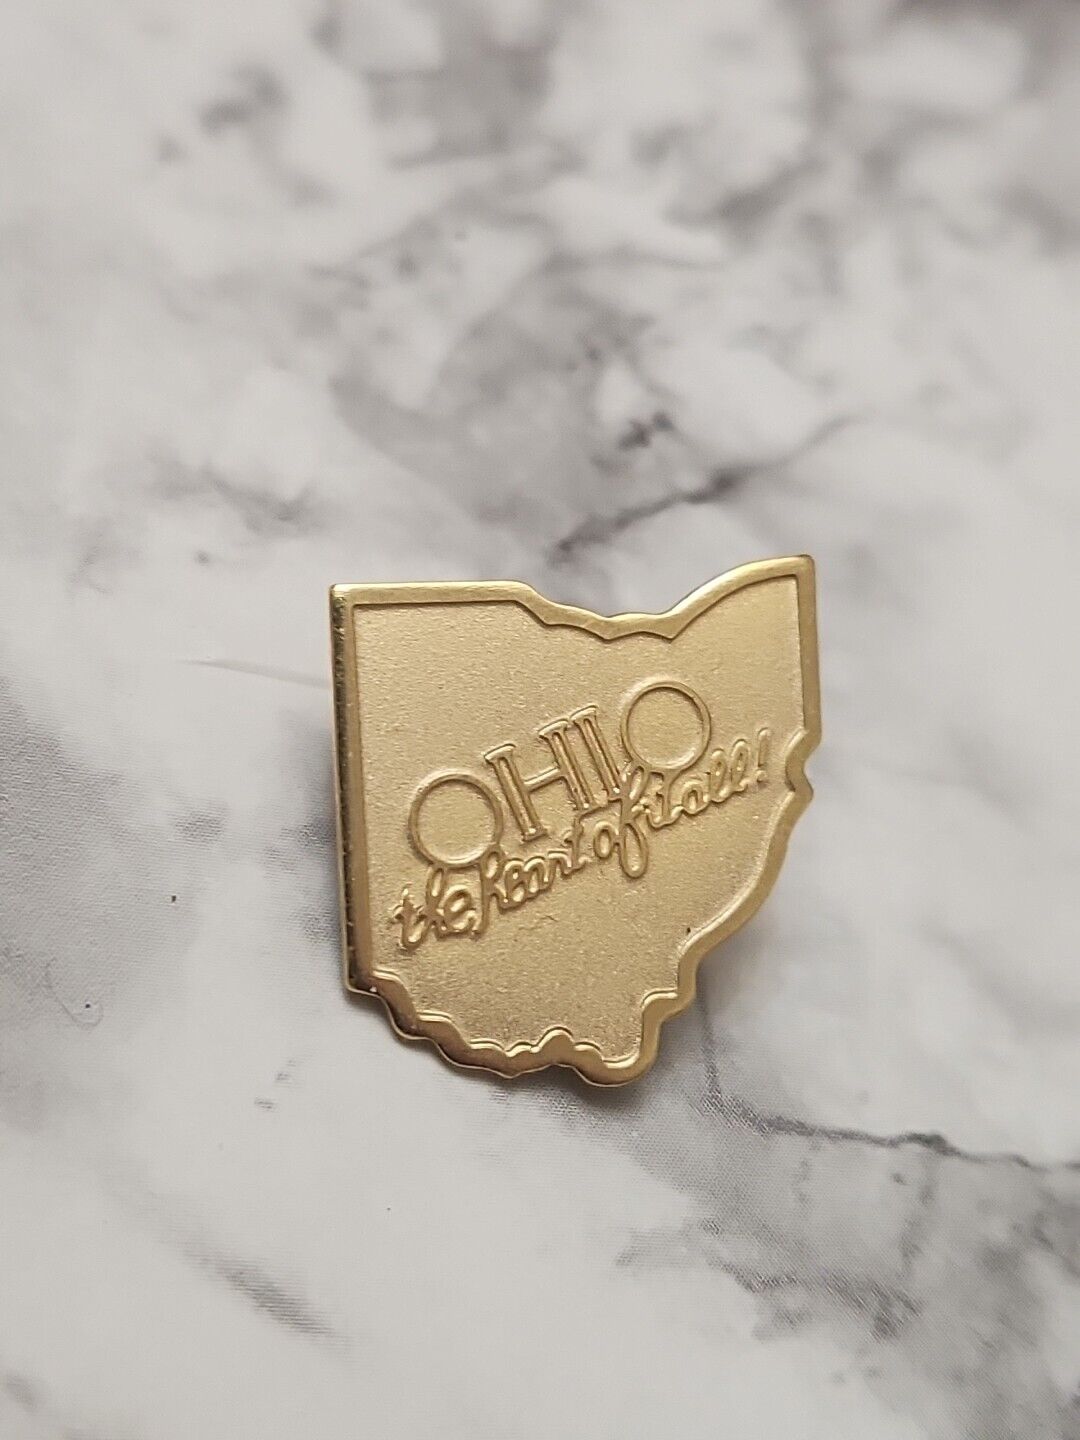 Vintage Ohio The Heart Of It All Gold Tone Lapel Pin Hat Lanyard Pins Tie Tack